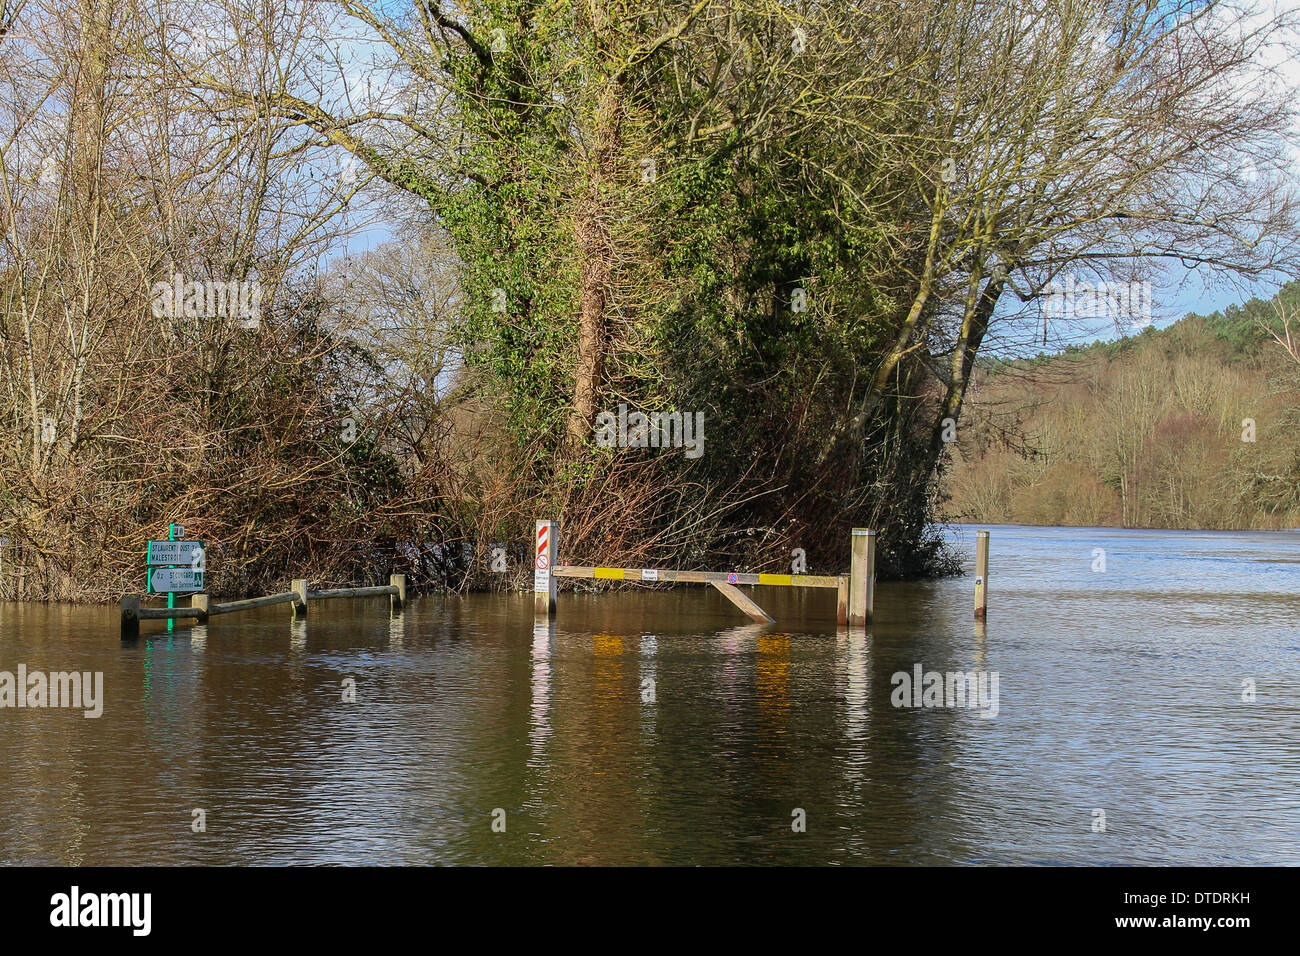 Submerged barrier, in a public garden in St Congard, roadsigns Stock Photo